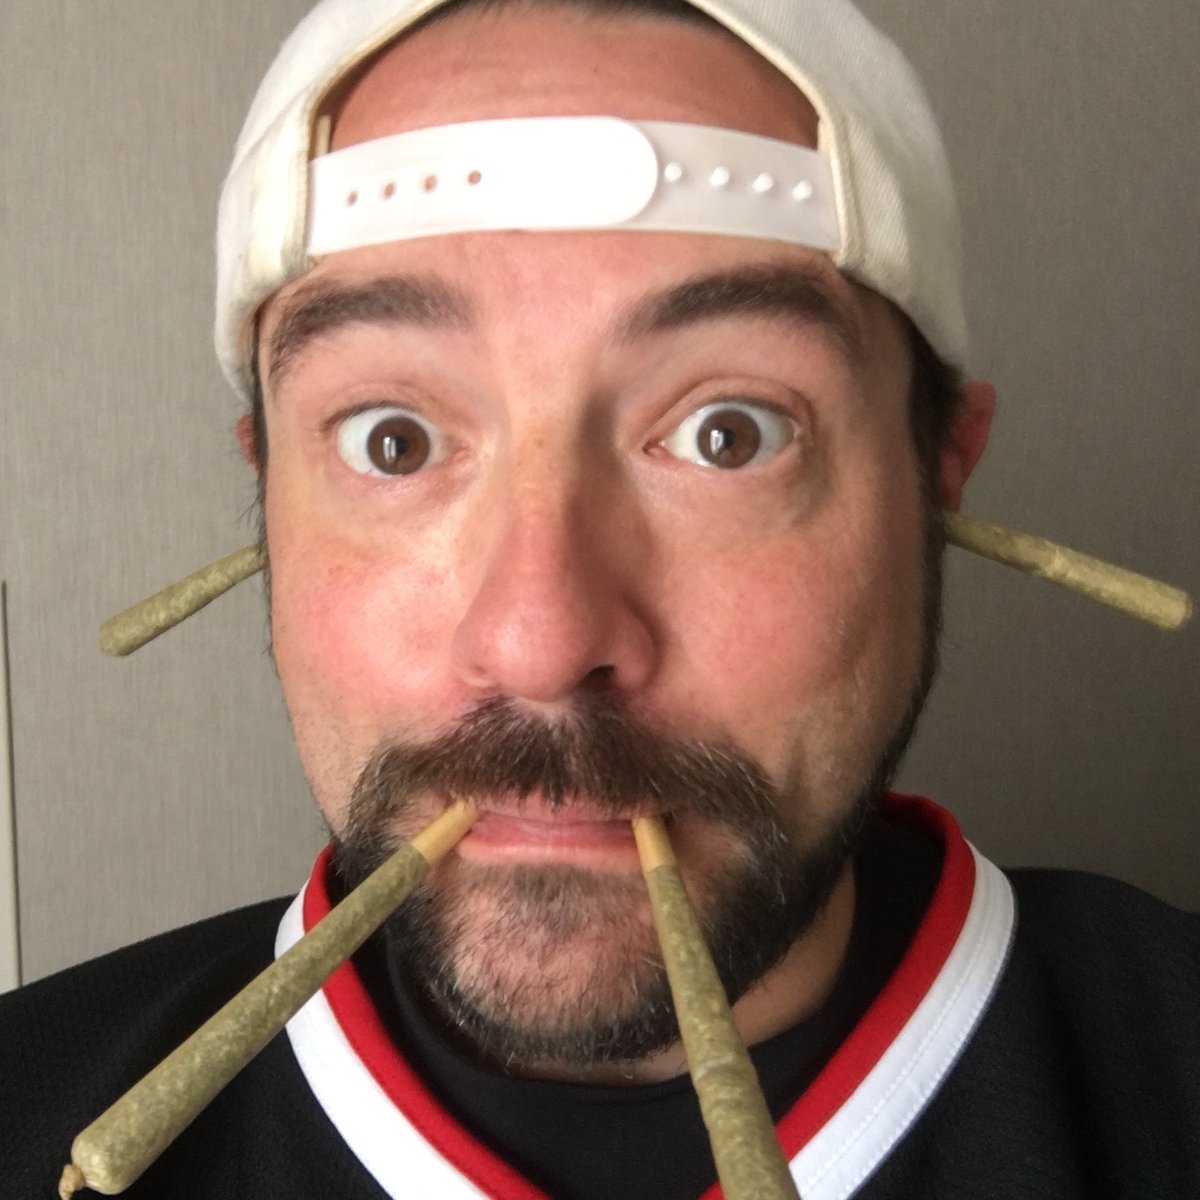 Happy 4/20, West Coast! Weed Walrus says celebrate the date by re-watching @tuskthemovie! https://t.co/wYkvdjy9aW